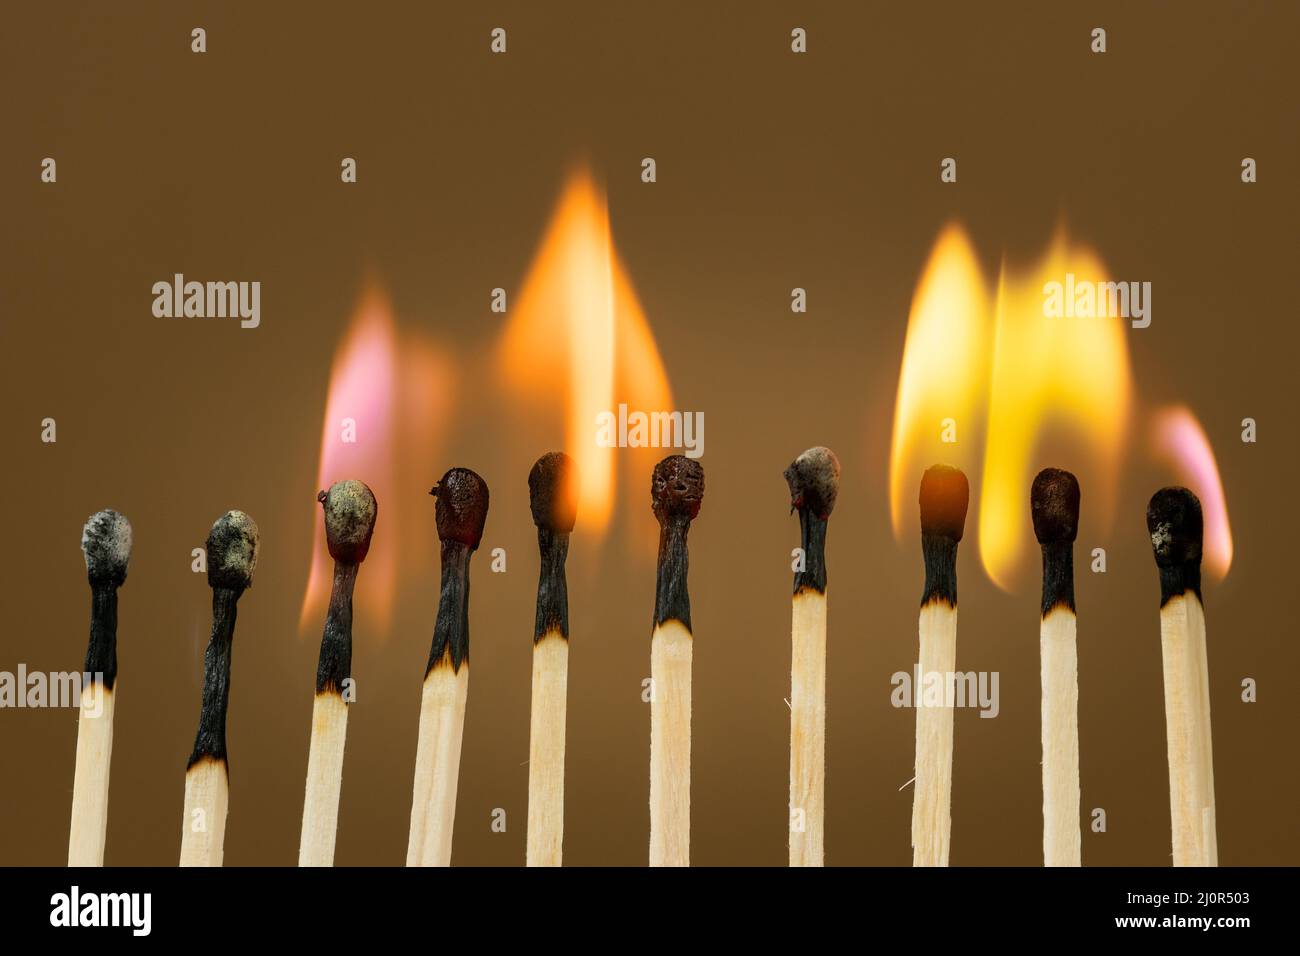 Match sticks burning with a bright colorful flames Stock Photo